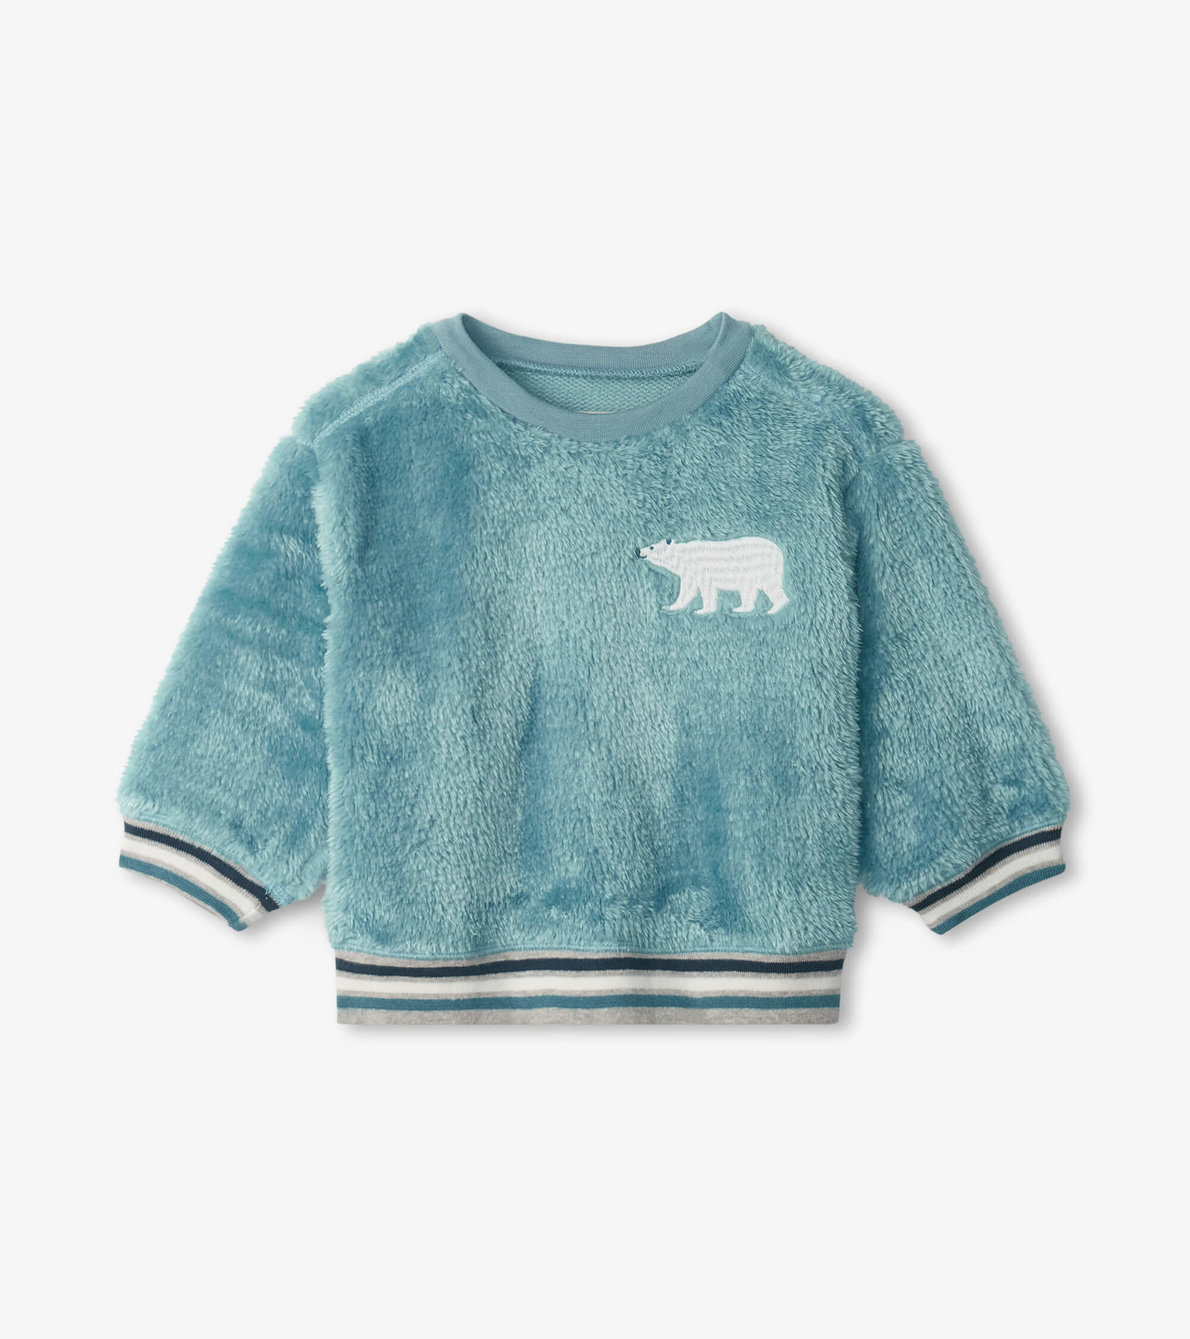 View larger image of Winter Cub Sherpa Fleece Baby Pullover